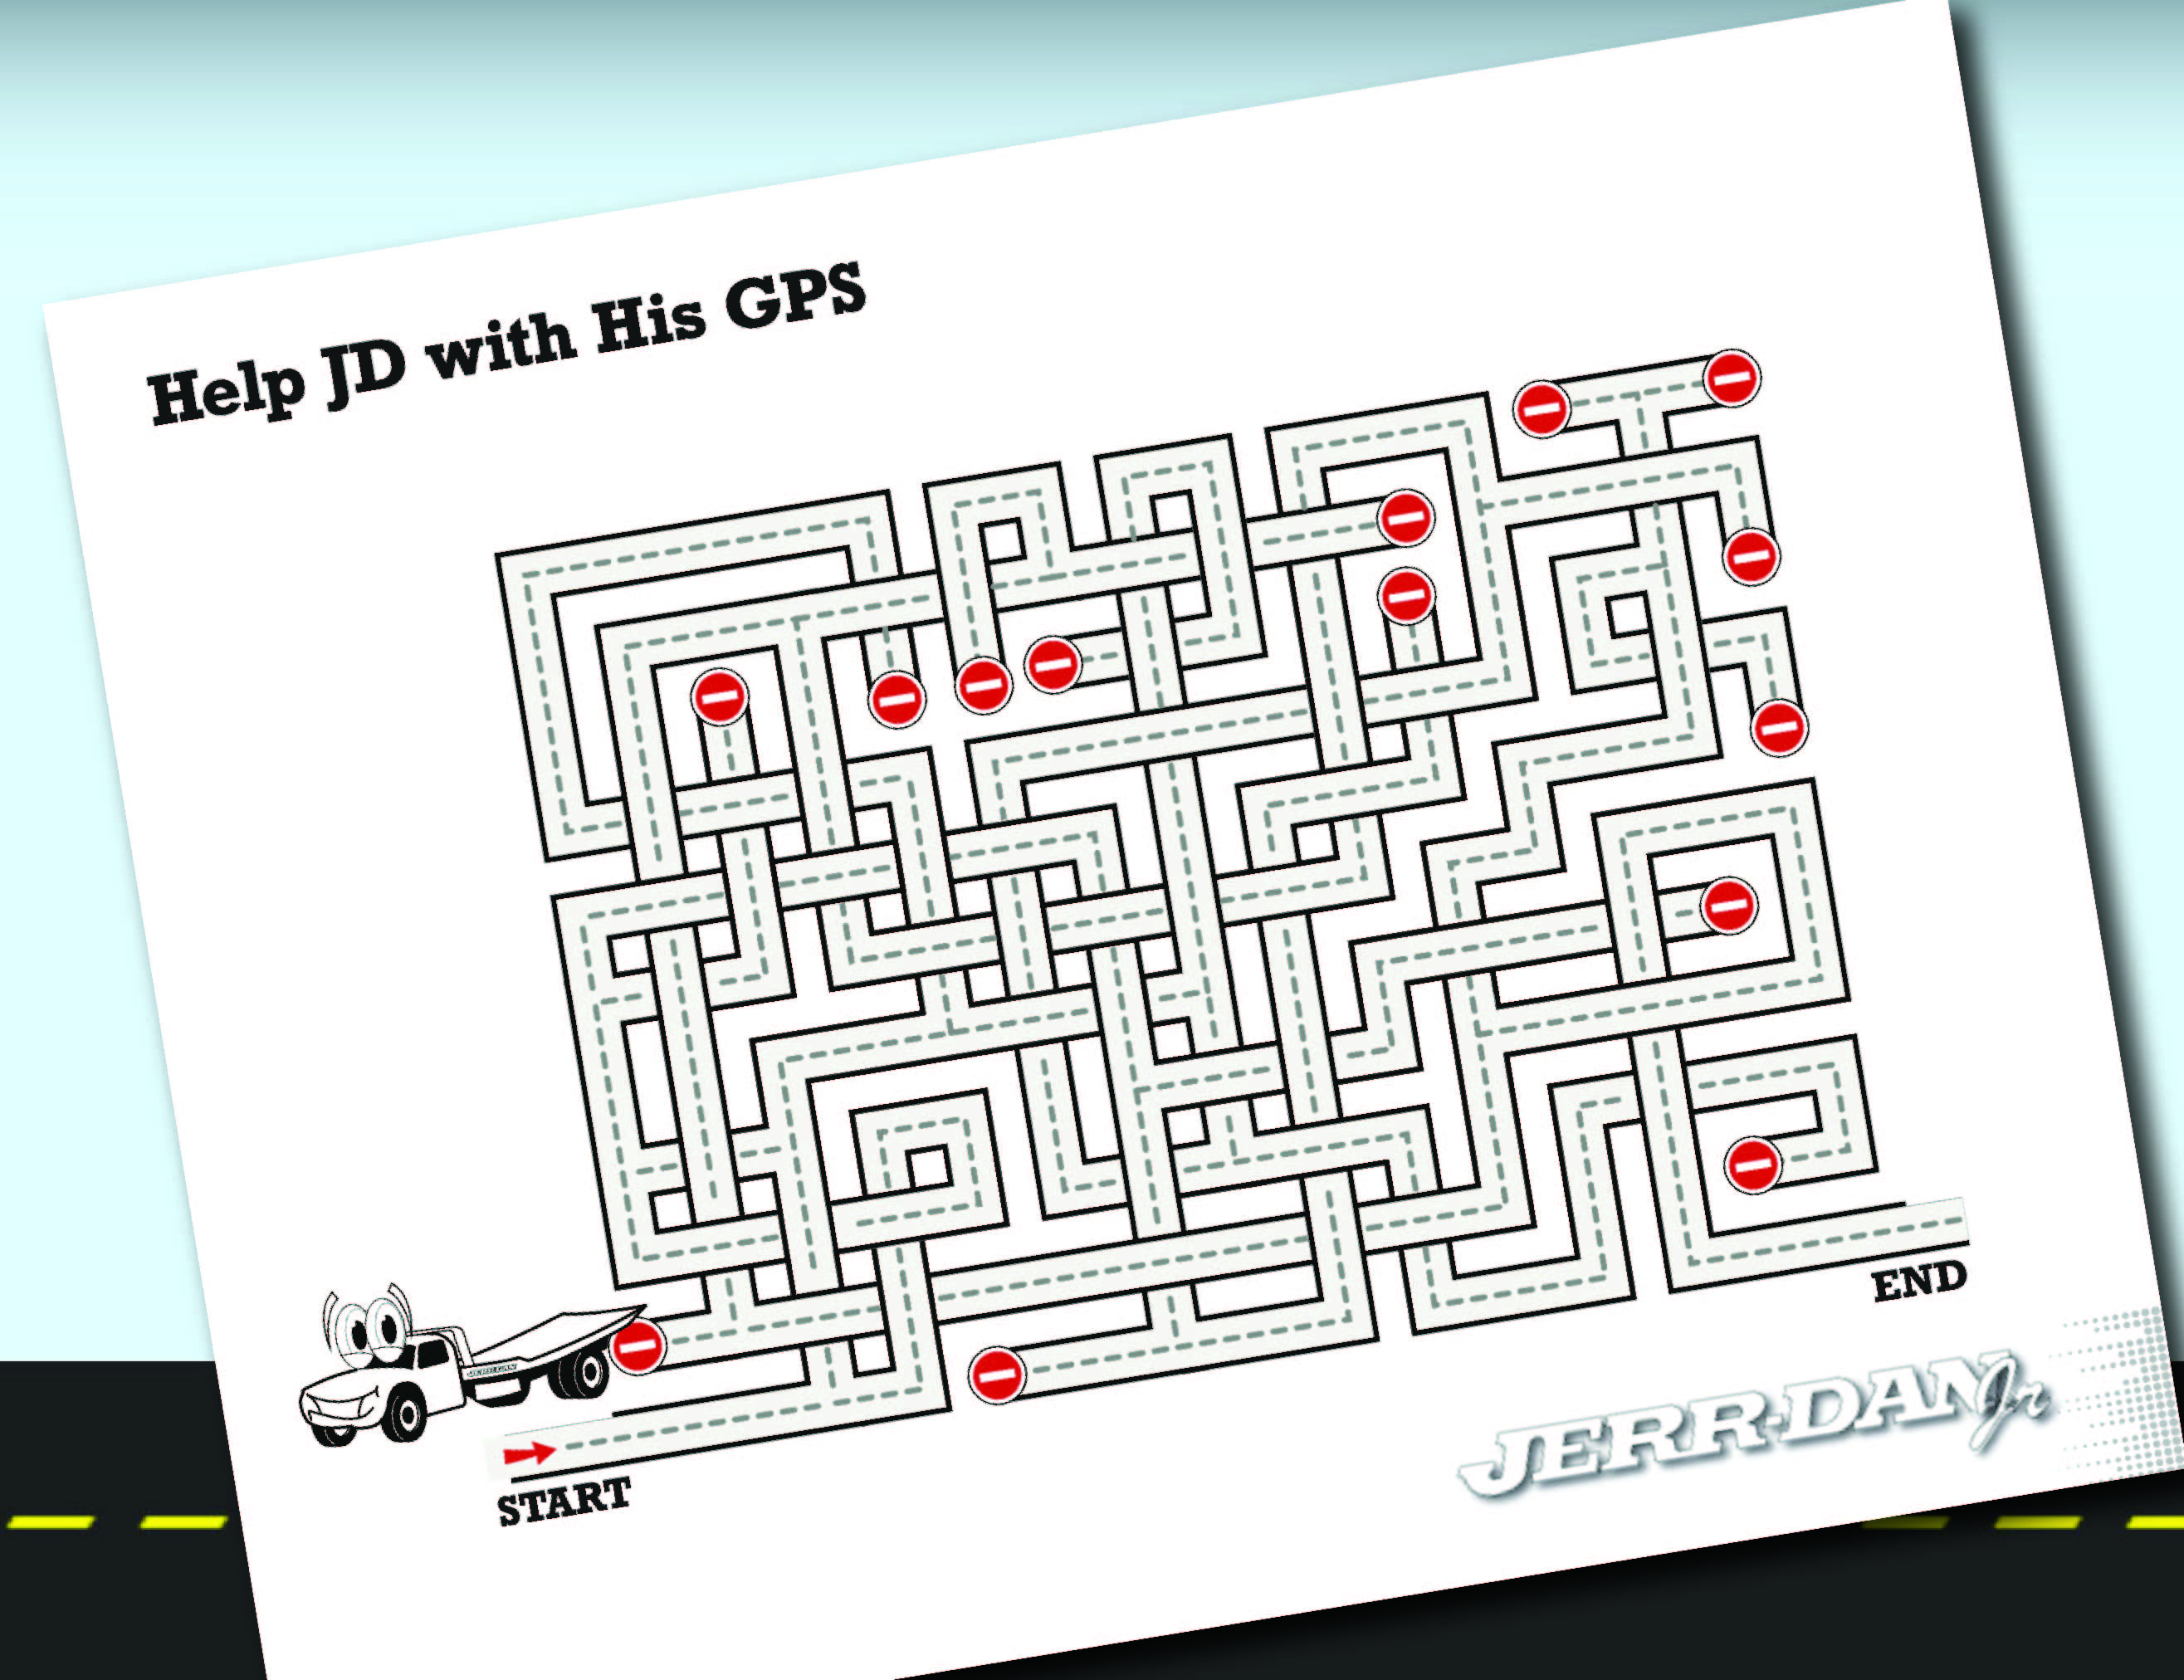 Help JD with his GPS